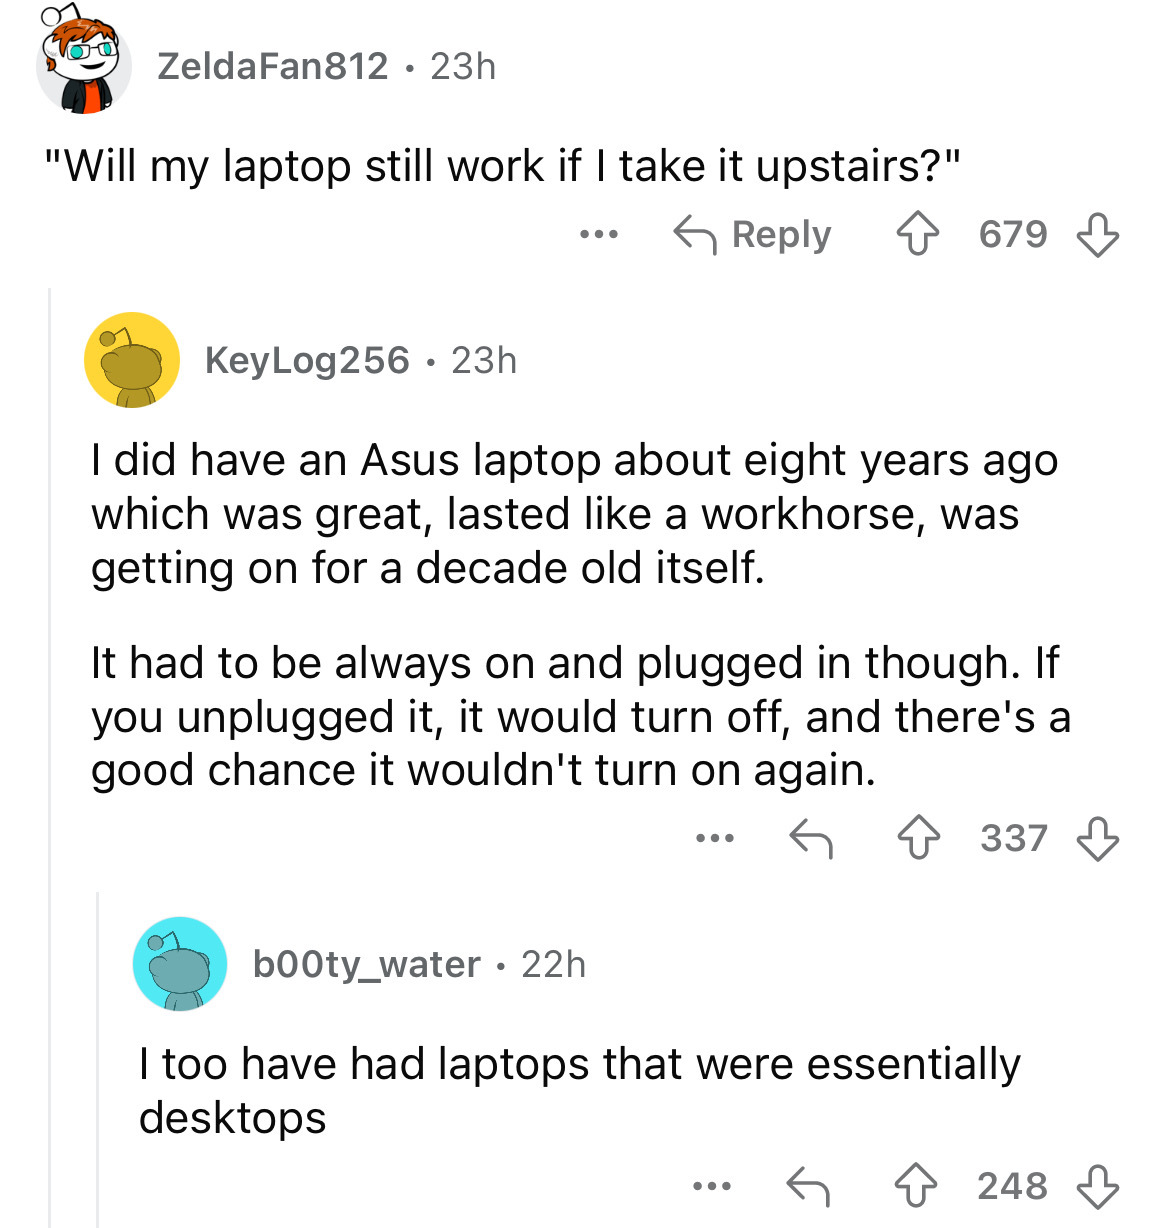 screenshot - Zelda Fan812 23h "Will my laptop still work if I take it upstairs?" KeyLog256 23h ... 679 I did have an Asus laptop about eight years ago which was great, lasted a workhorse, was getting on for a decade old itself. It had to be always on and 